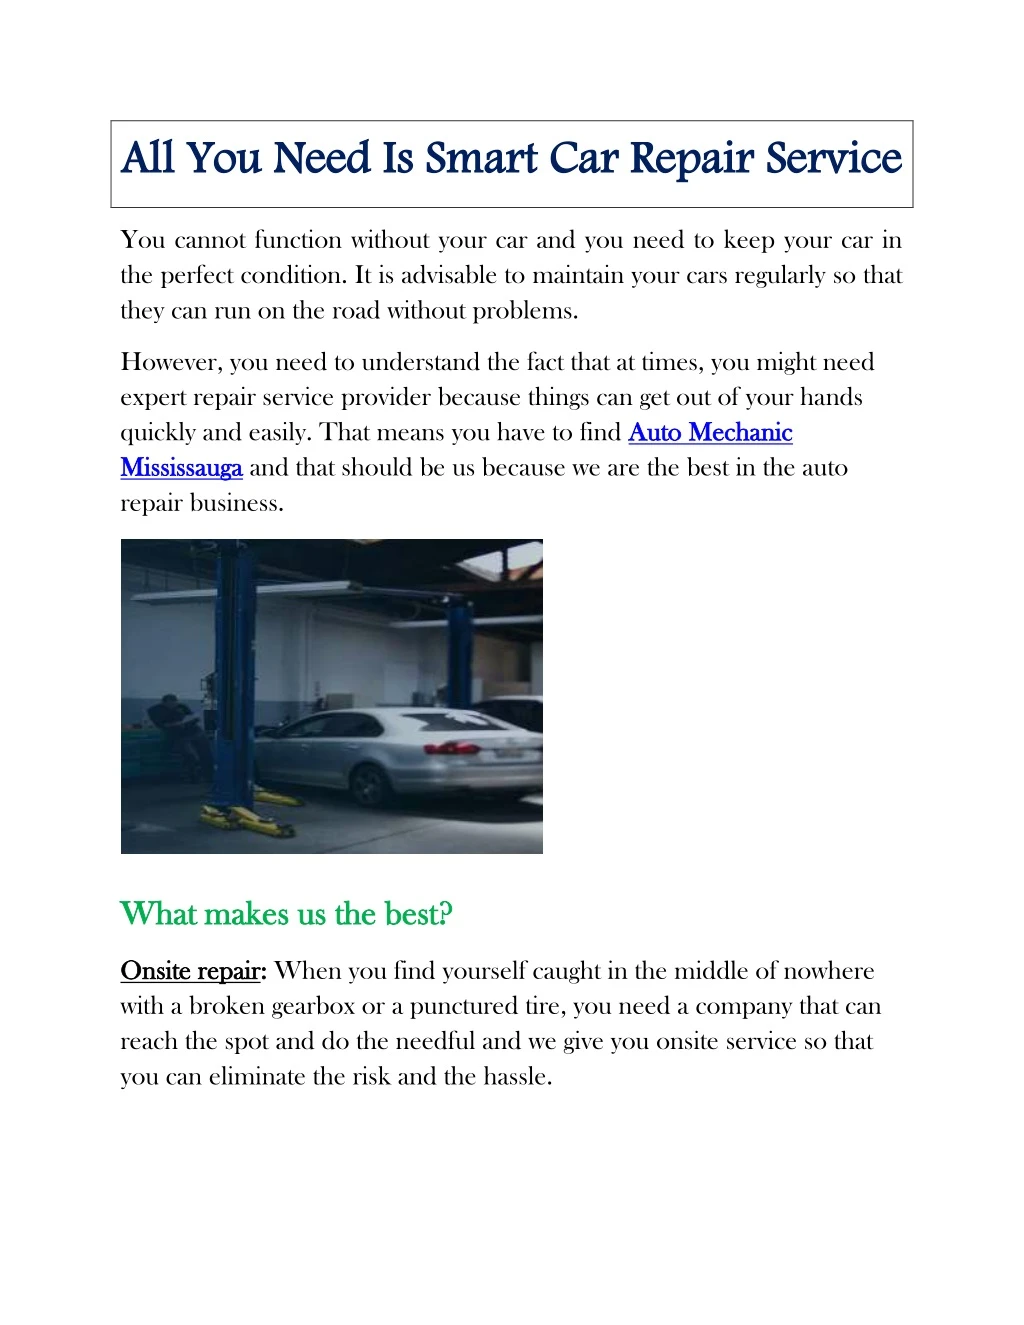 all you need is smart car repair service